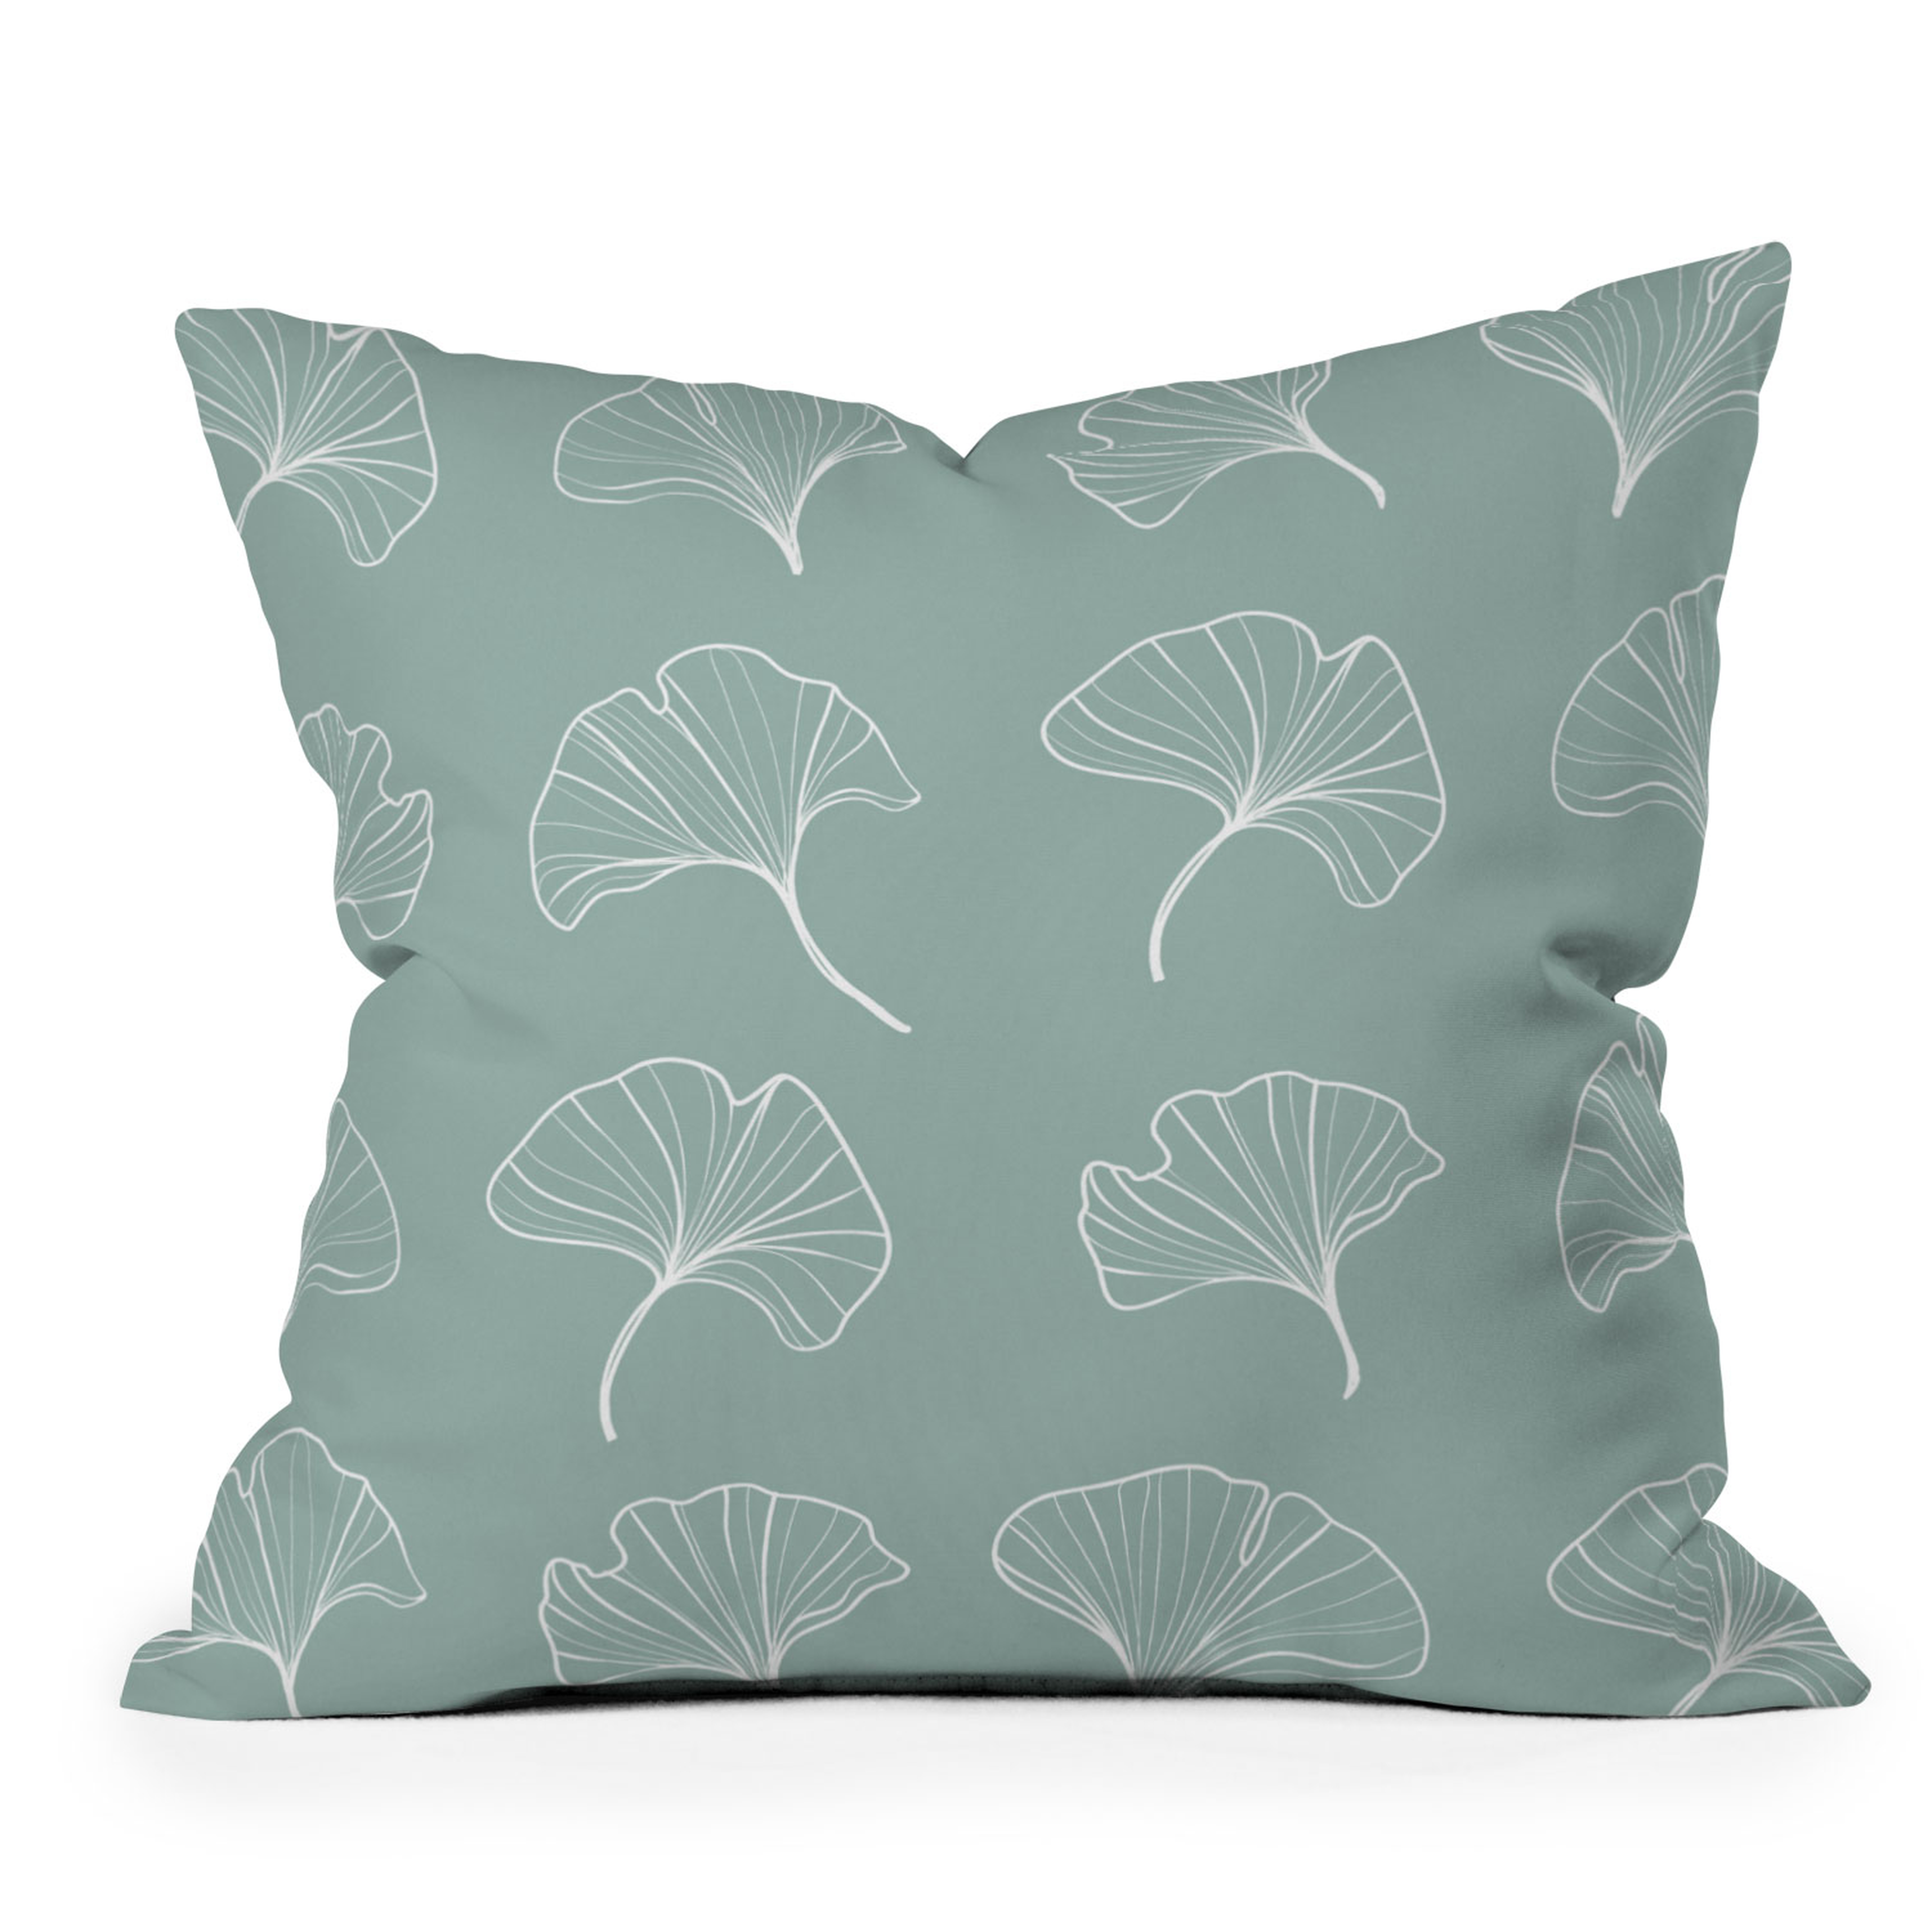 Teal Ginkgo Leaves by Kelly Haines - Outdoor Throw Pillow 18" x 18" - Wander Print Co.